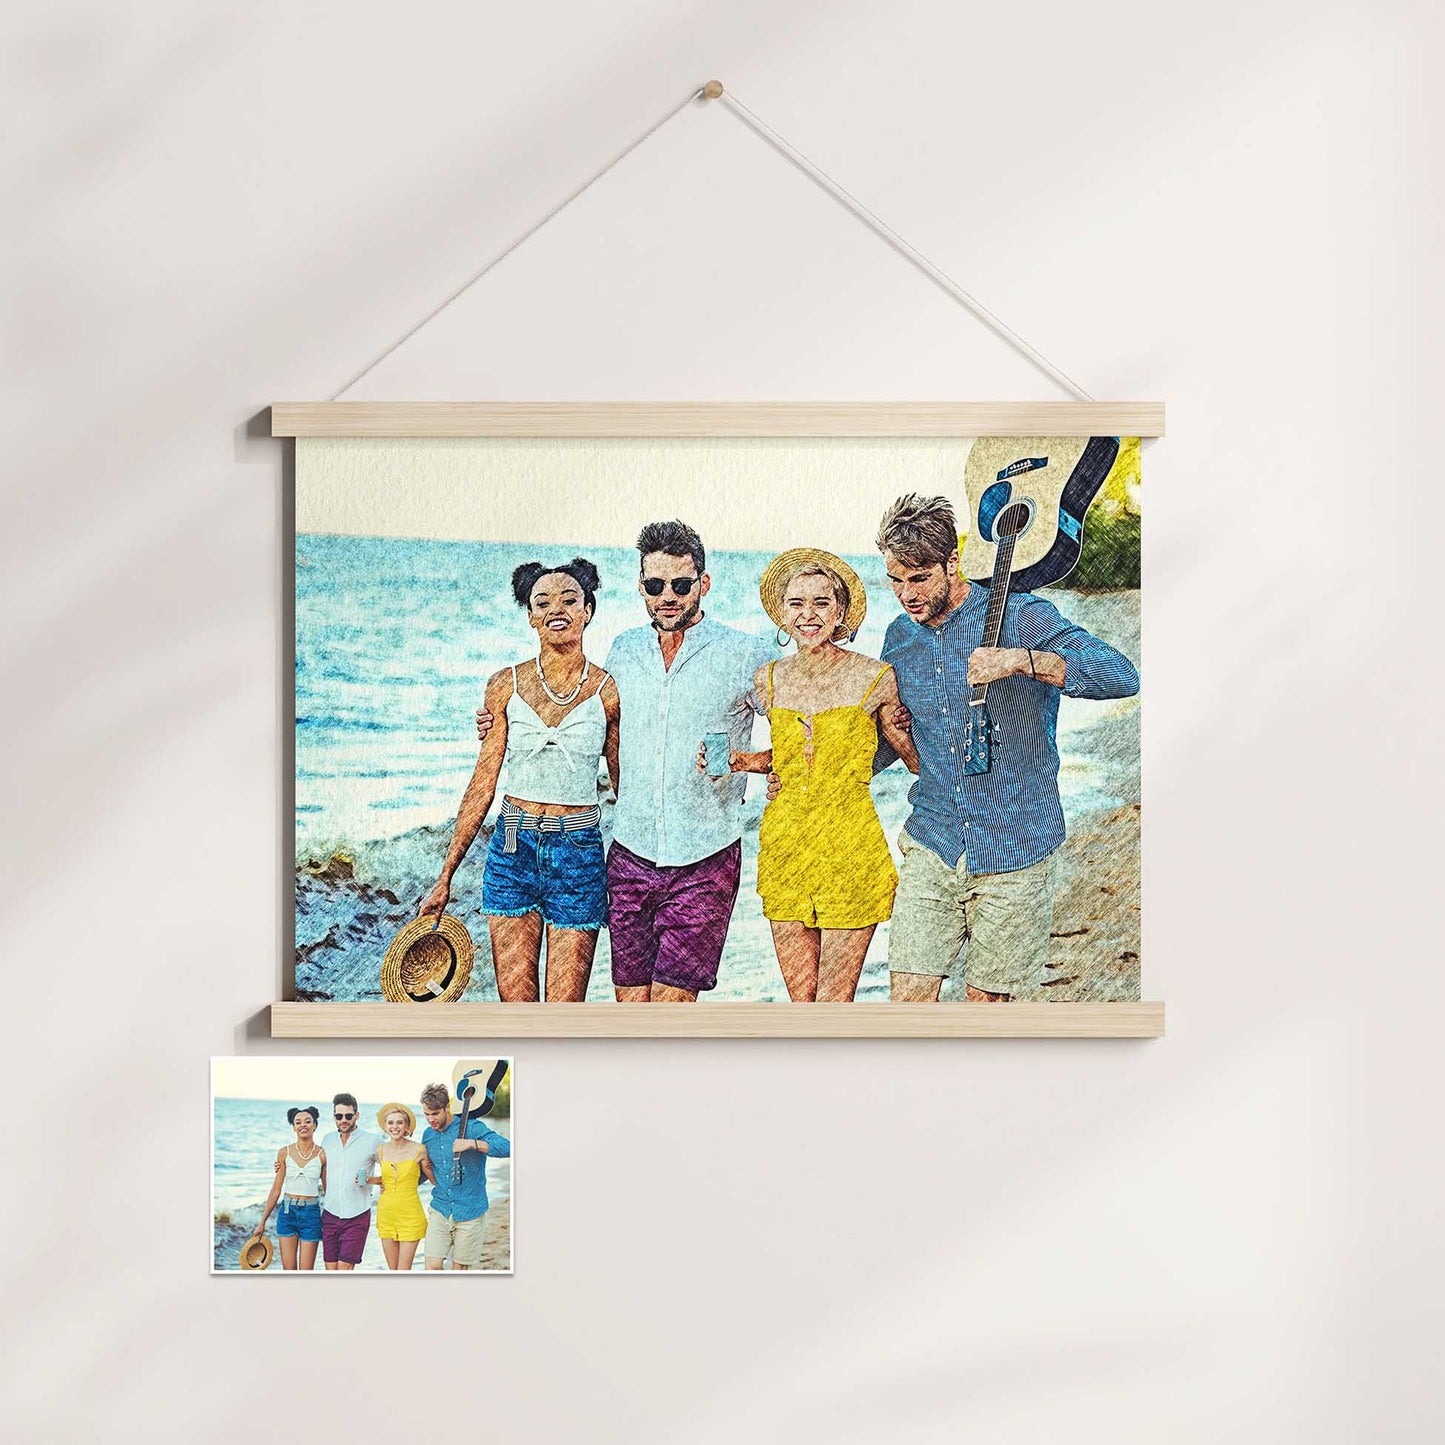 Transform your cherished memories into exquisite art with our Personalised Charcoal Drawing Poster Hanger. Handcrafted from your photo, it captures the depth and richness of a charcoal drawing with its vibrant and sophisticated effect